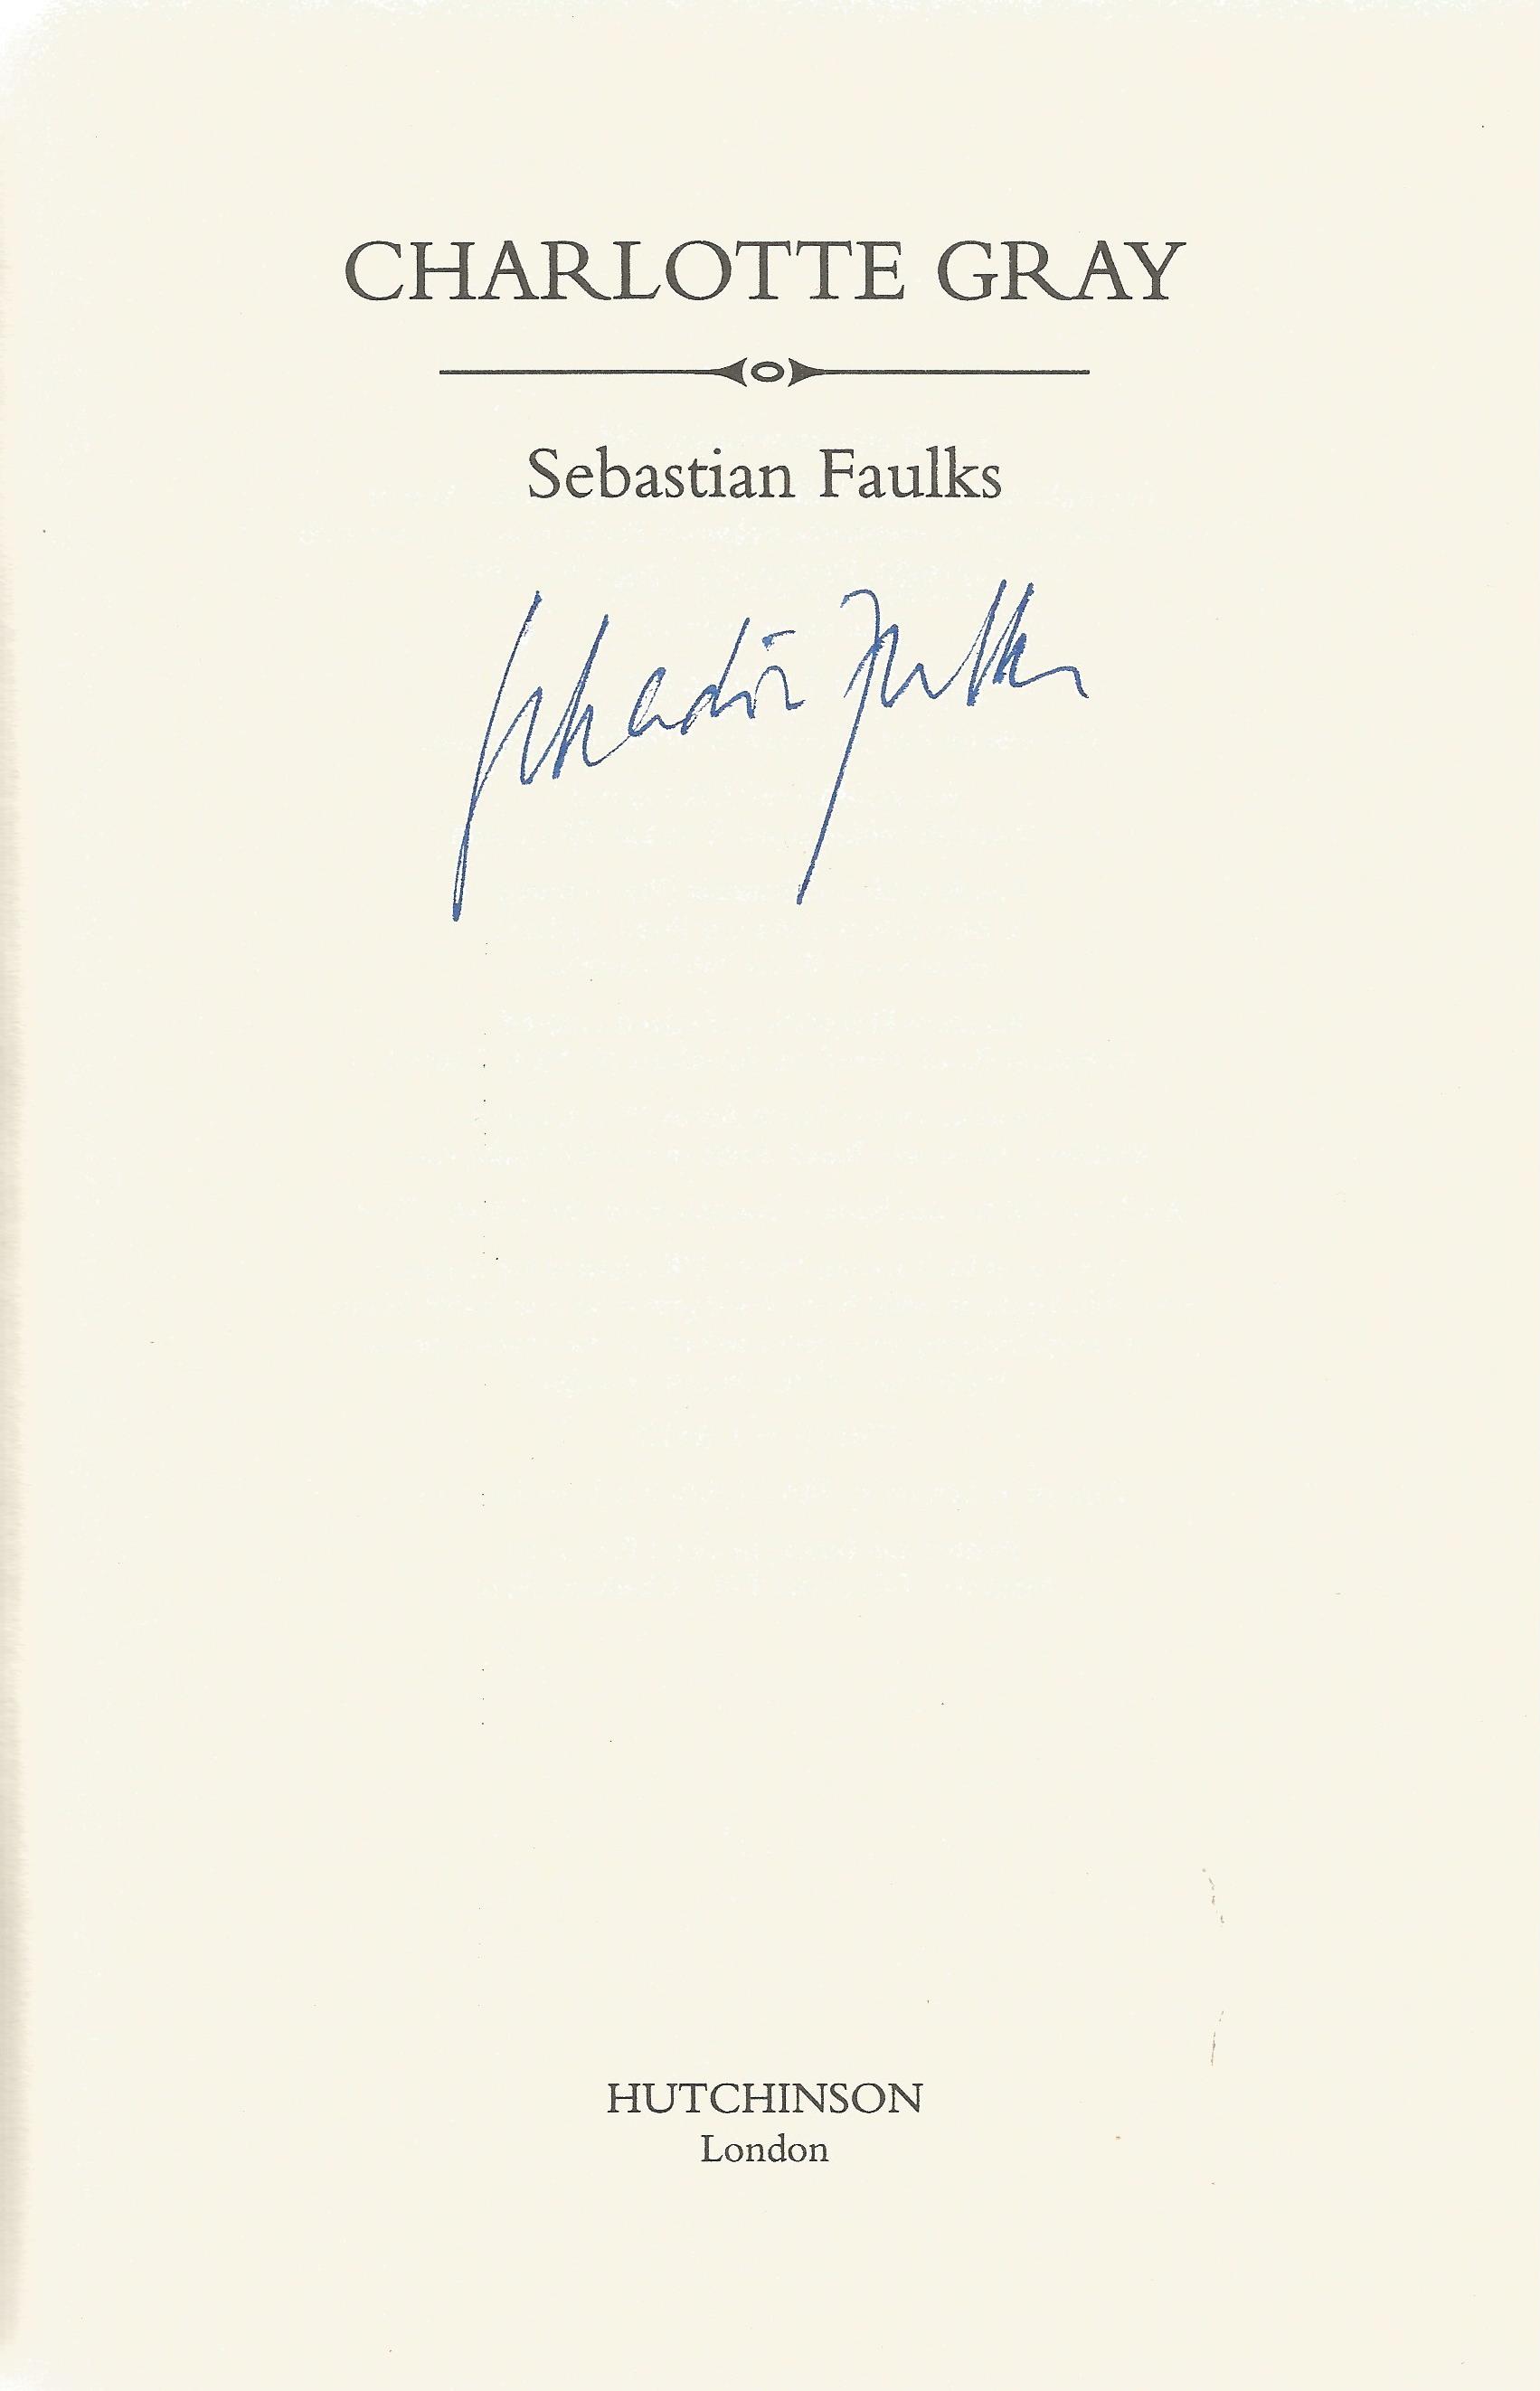 Sebastian Faulks Hardback Book Charlotte Gray signed by the Author on the Title Page dust cover - Image 2 of 2